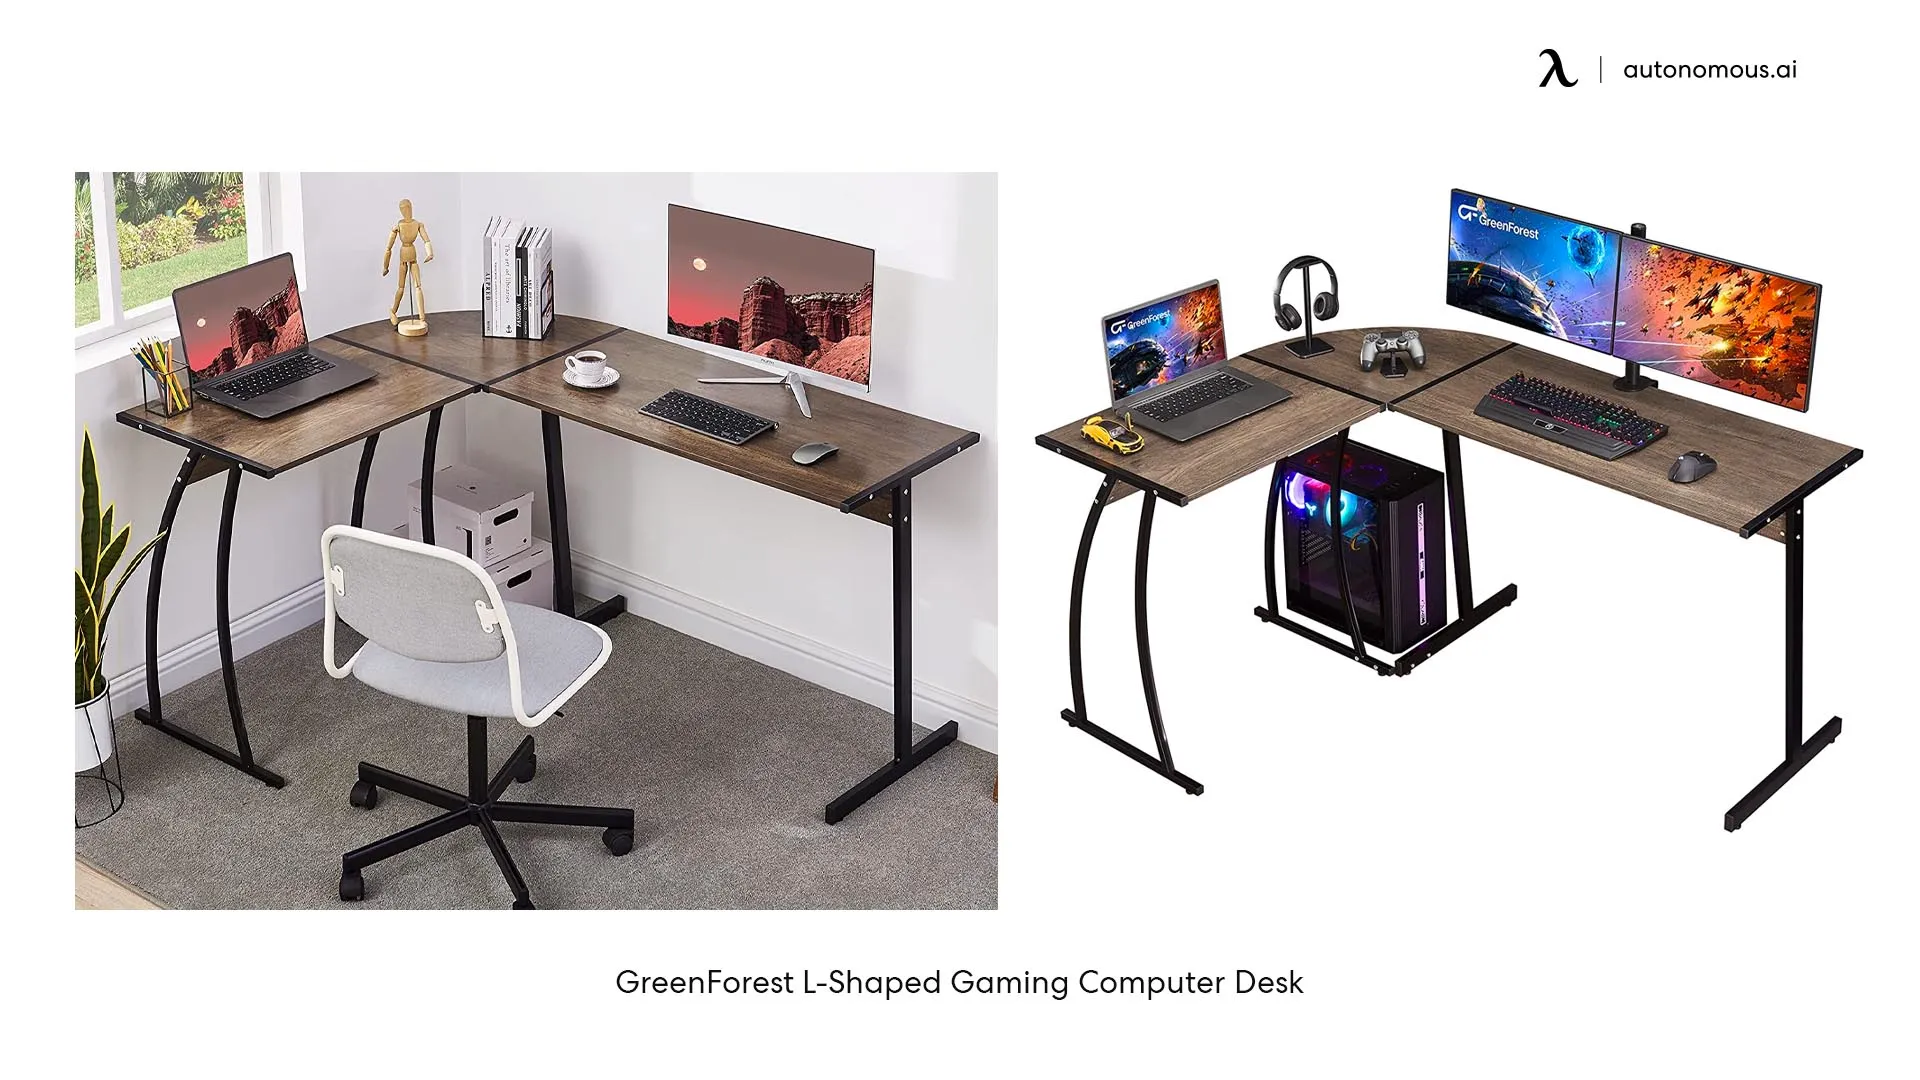 58.1-inch L-shaped Gamer Desk from GreenForest